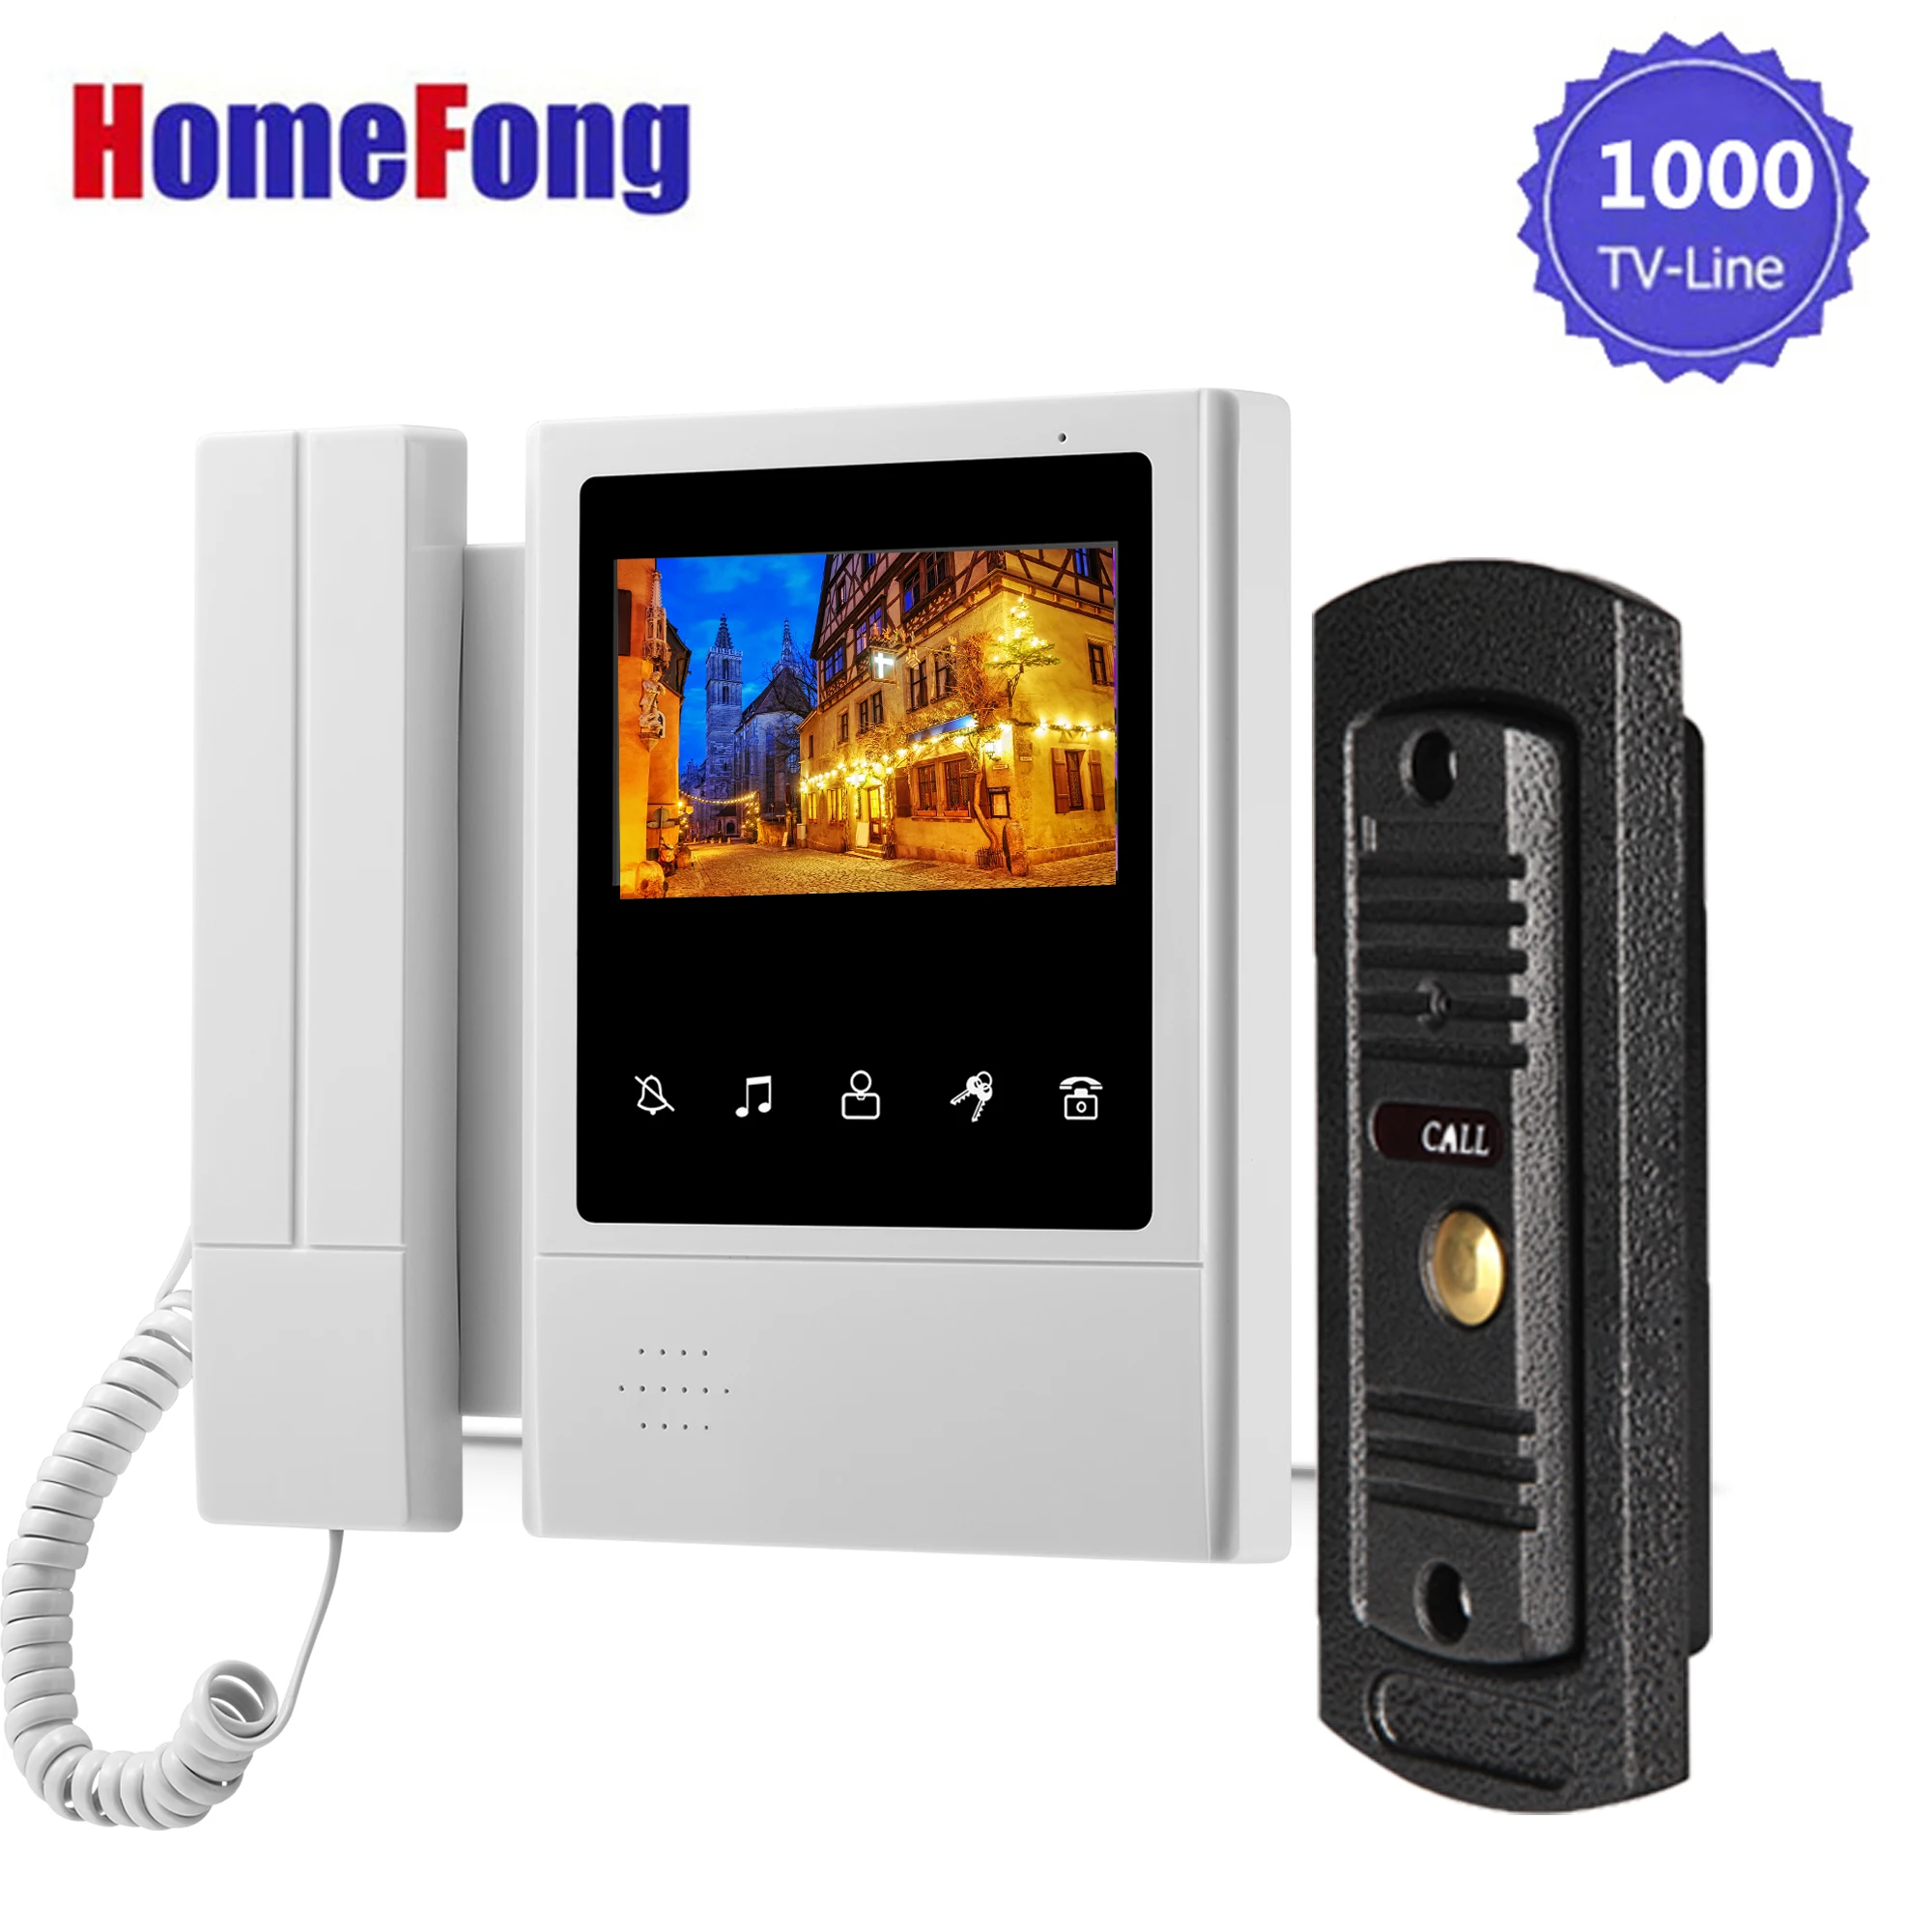 Homefong 4.3 Inch Wired Video Door Phone Intercom System Doorbell with Camera 1X Monitor and 1X 1000TVL Outdoor Station